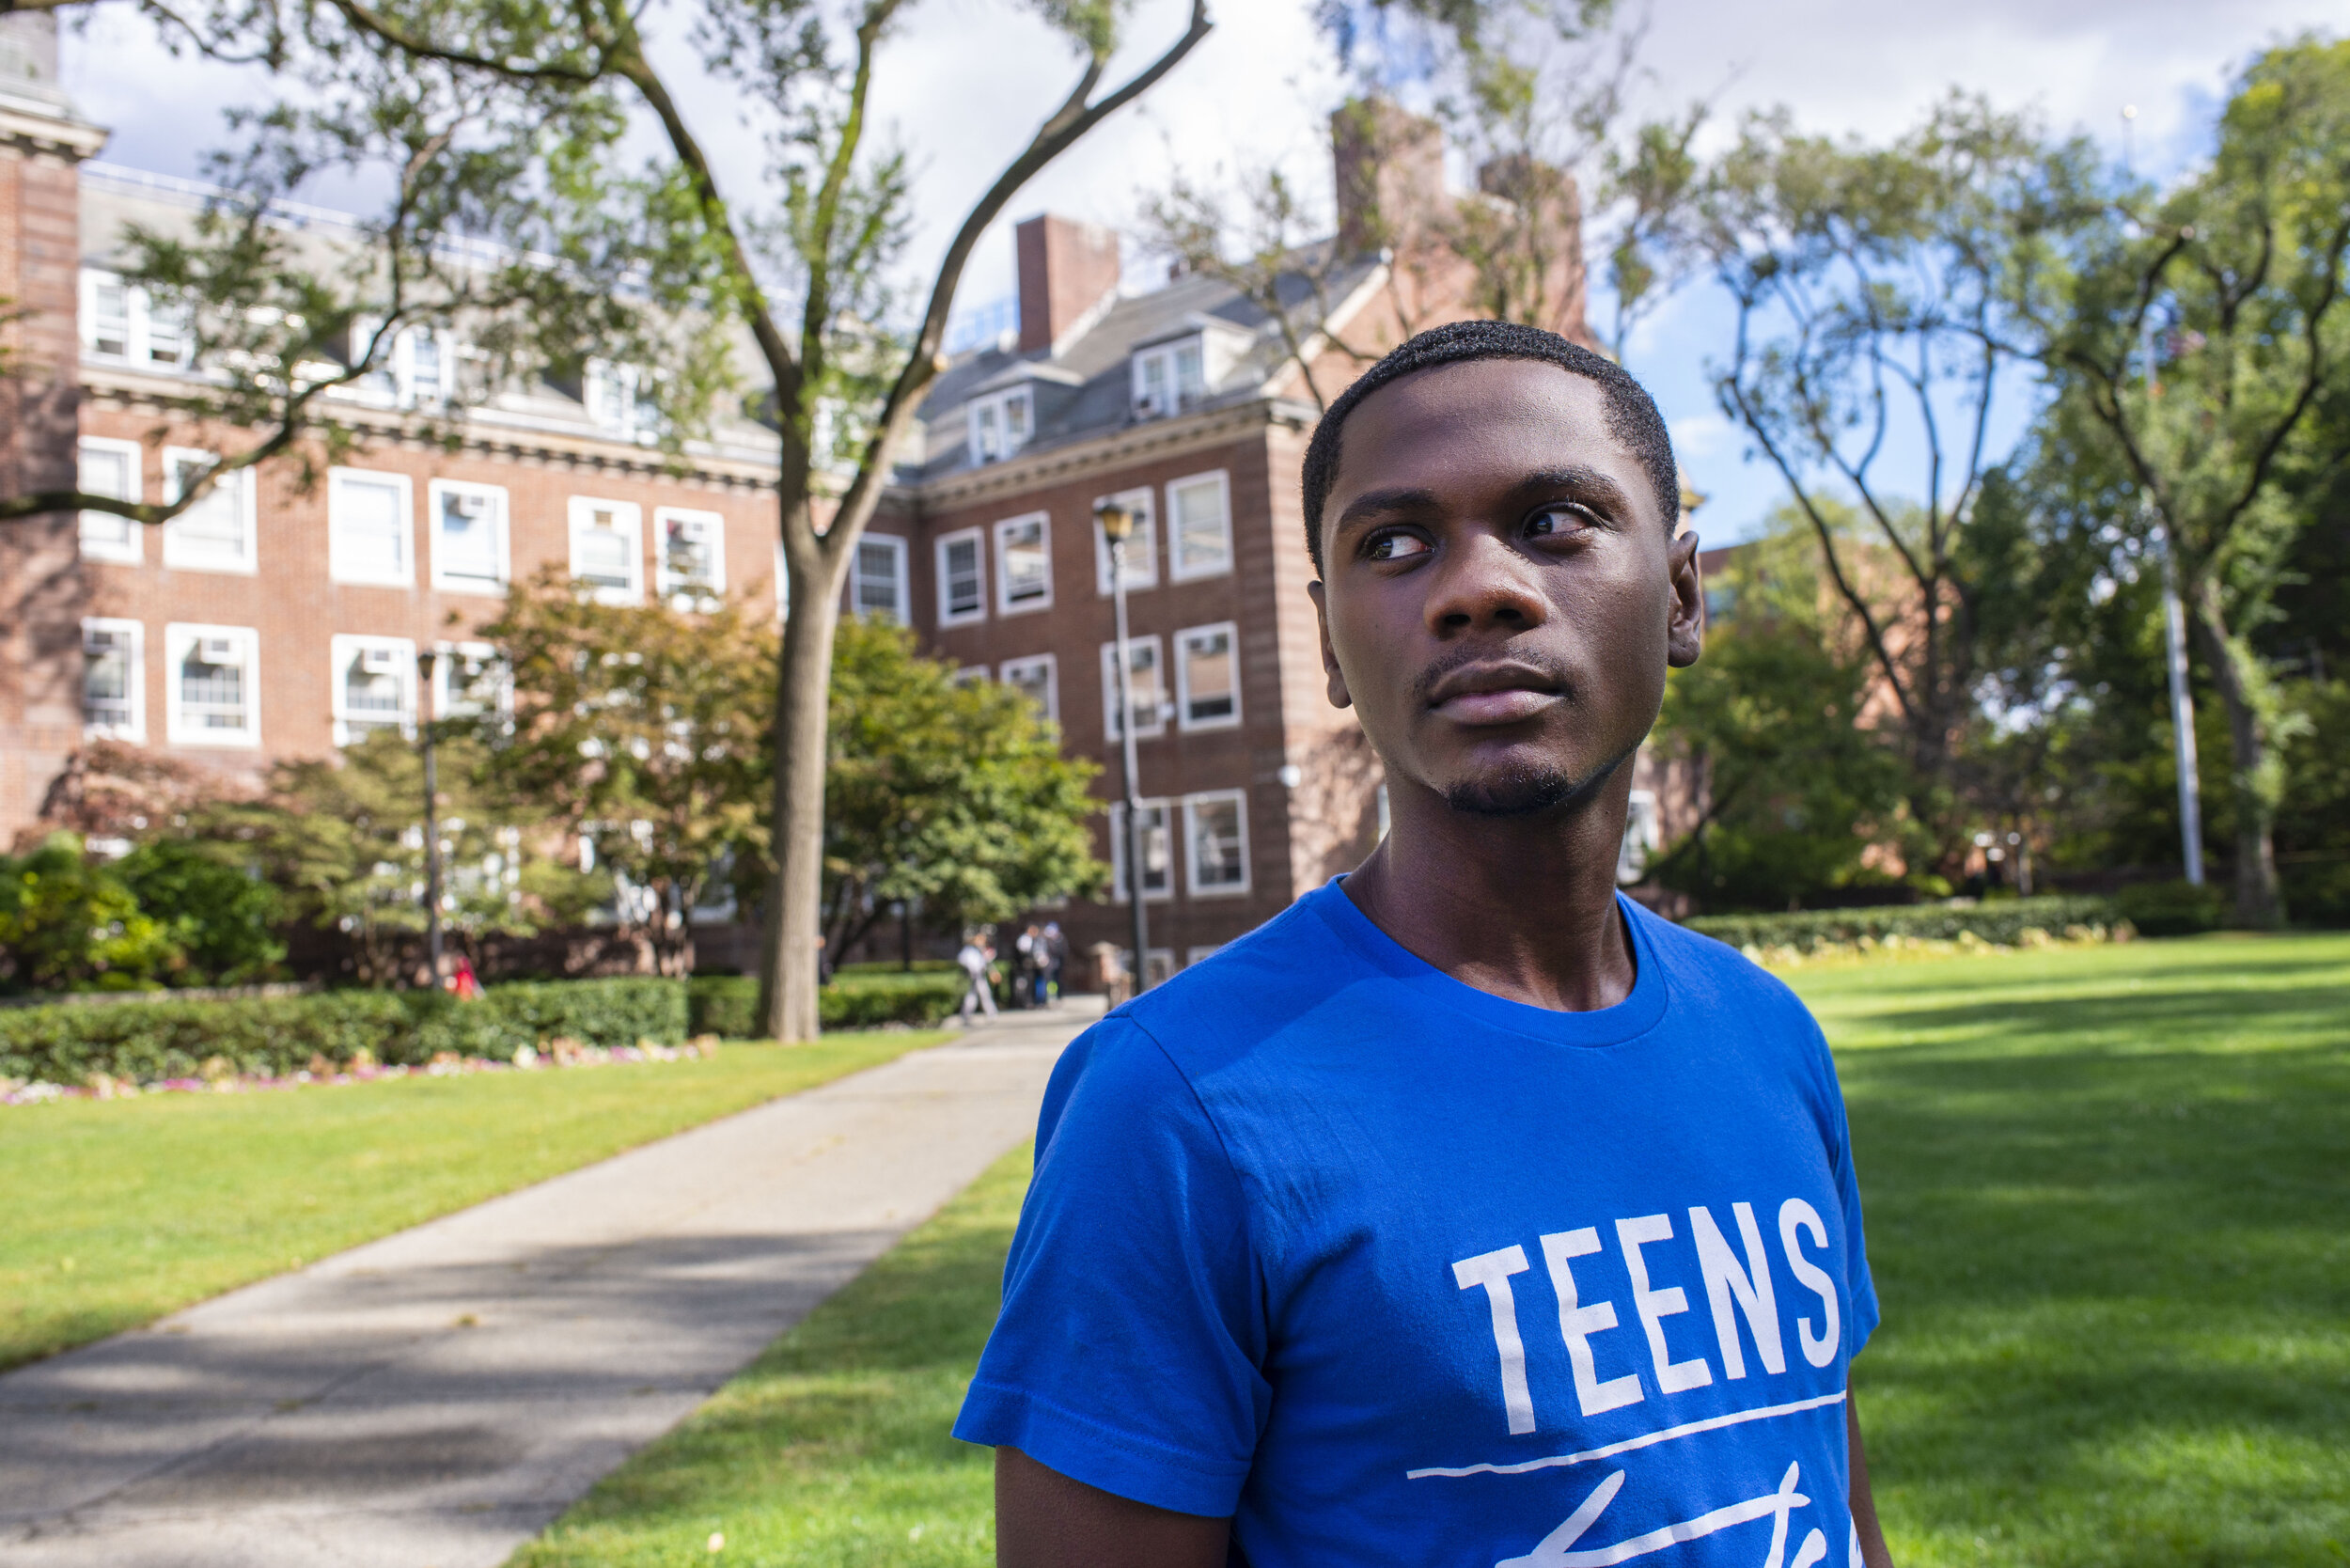  Lennox Thomas, photographed on the campus of his High School in conjunction with Brooklyn College on October 4th, 2019. Thomas is a member of Teens Take Charge, a  student-led organization that aims to end segregation in New York schools. 